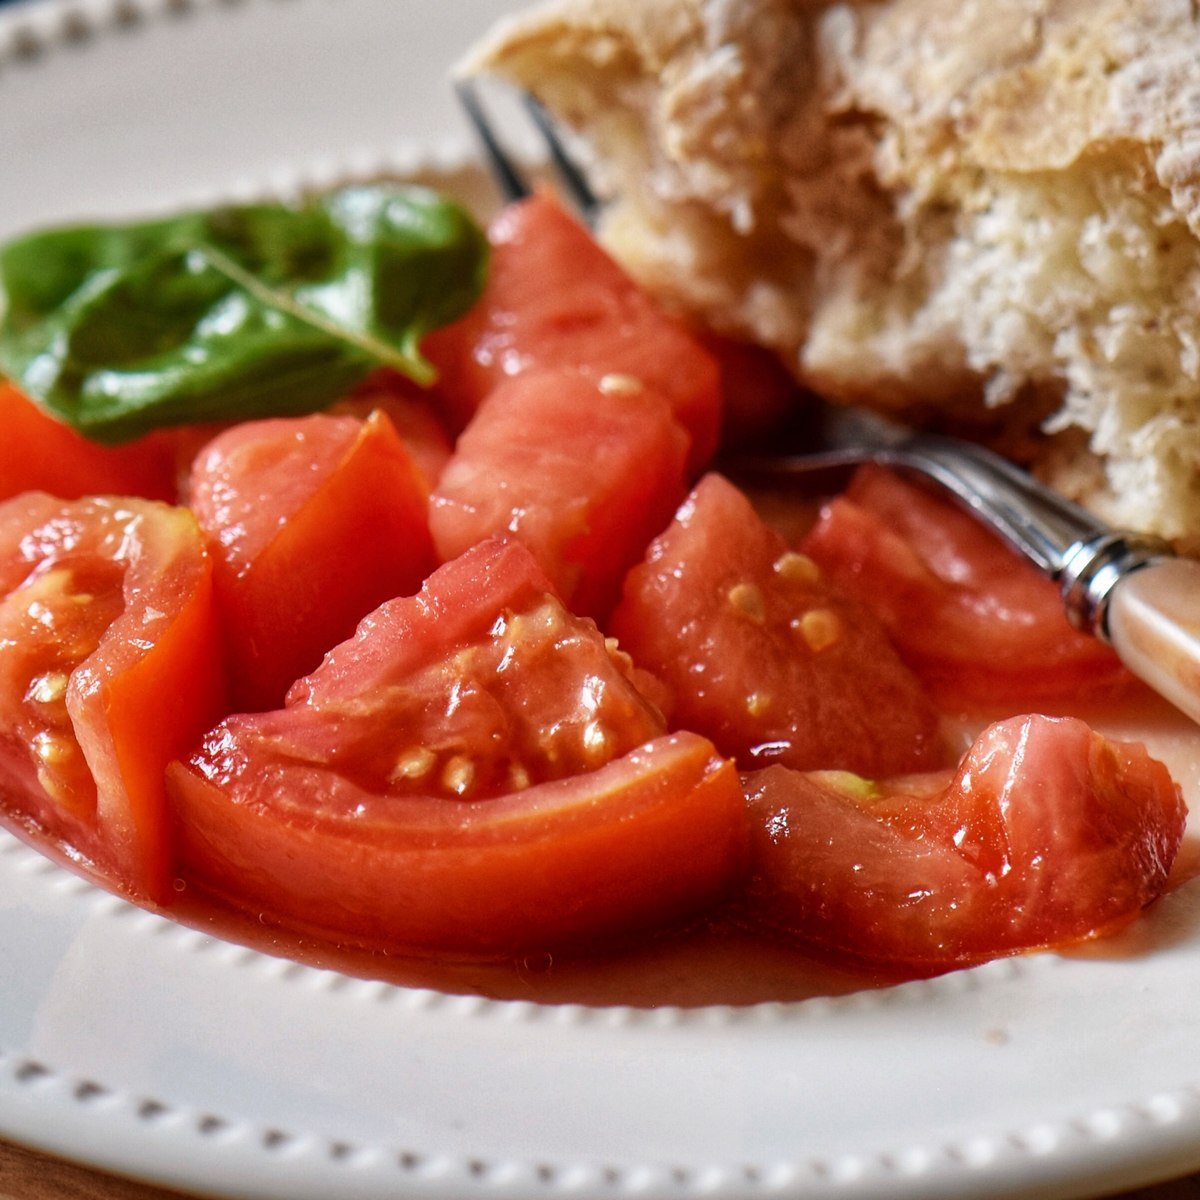 Marinated tomatoes in a white dish.